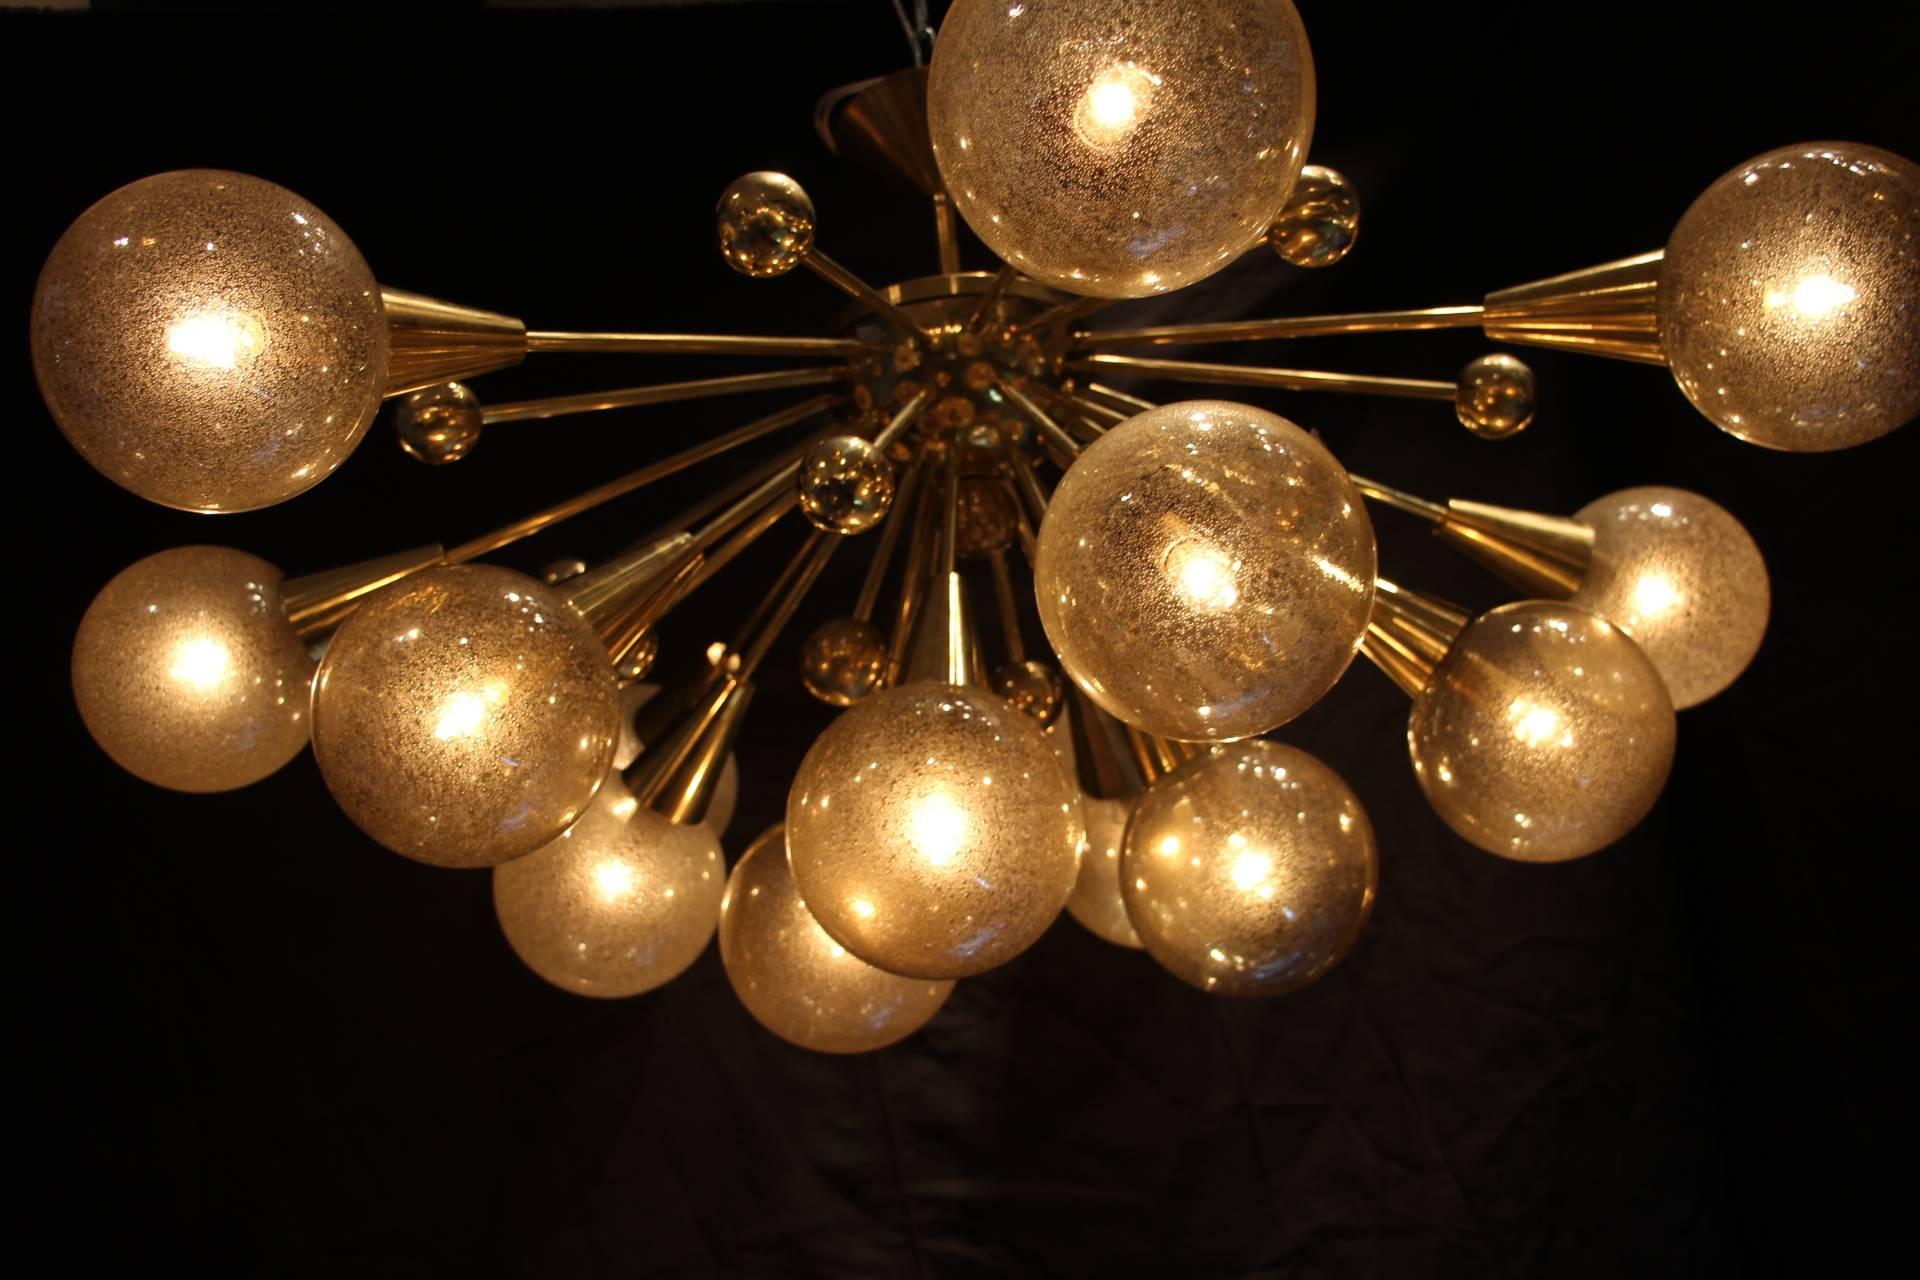 This brass chandelier features 15 champagne Murano glass globes and 15 brass balls extend on brass stems from the center. Each globe has got golden glitter inclusions.
Warm and pleasant light.
Unusual proportions: Only 65 cm height and 105 cm